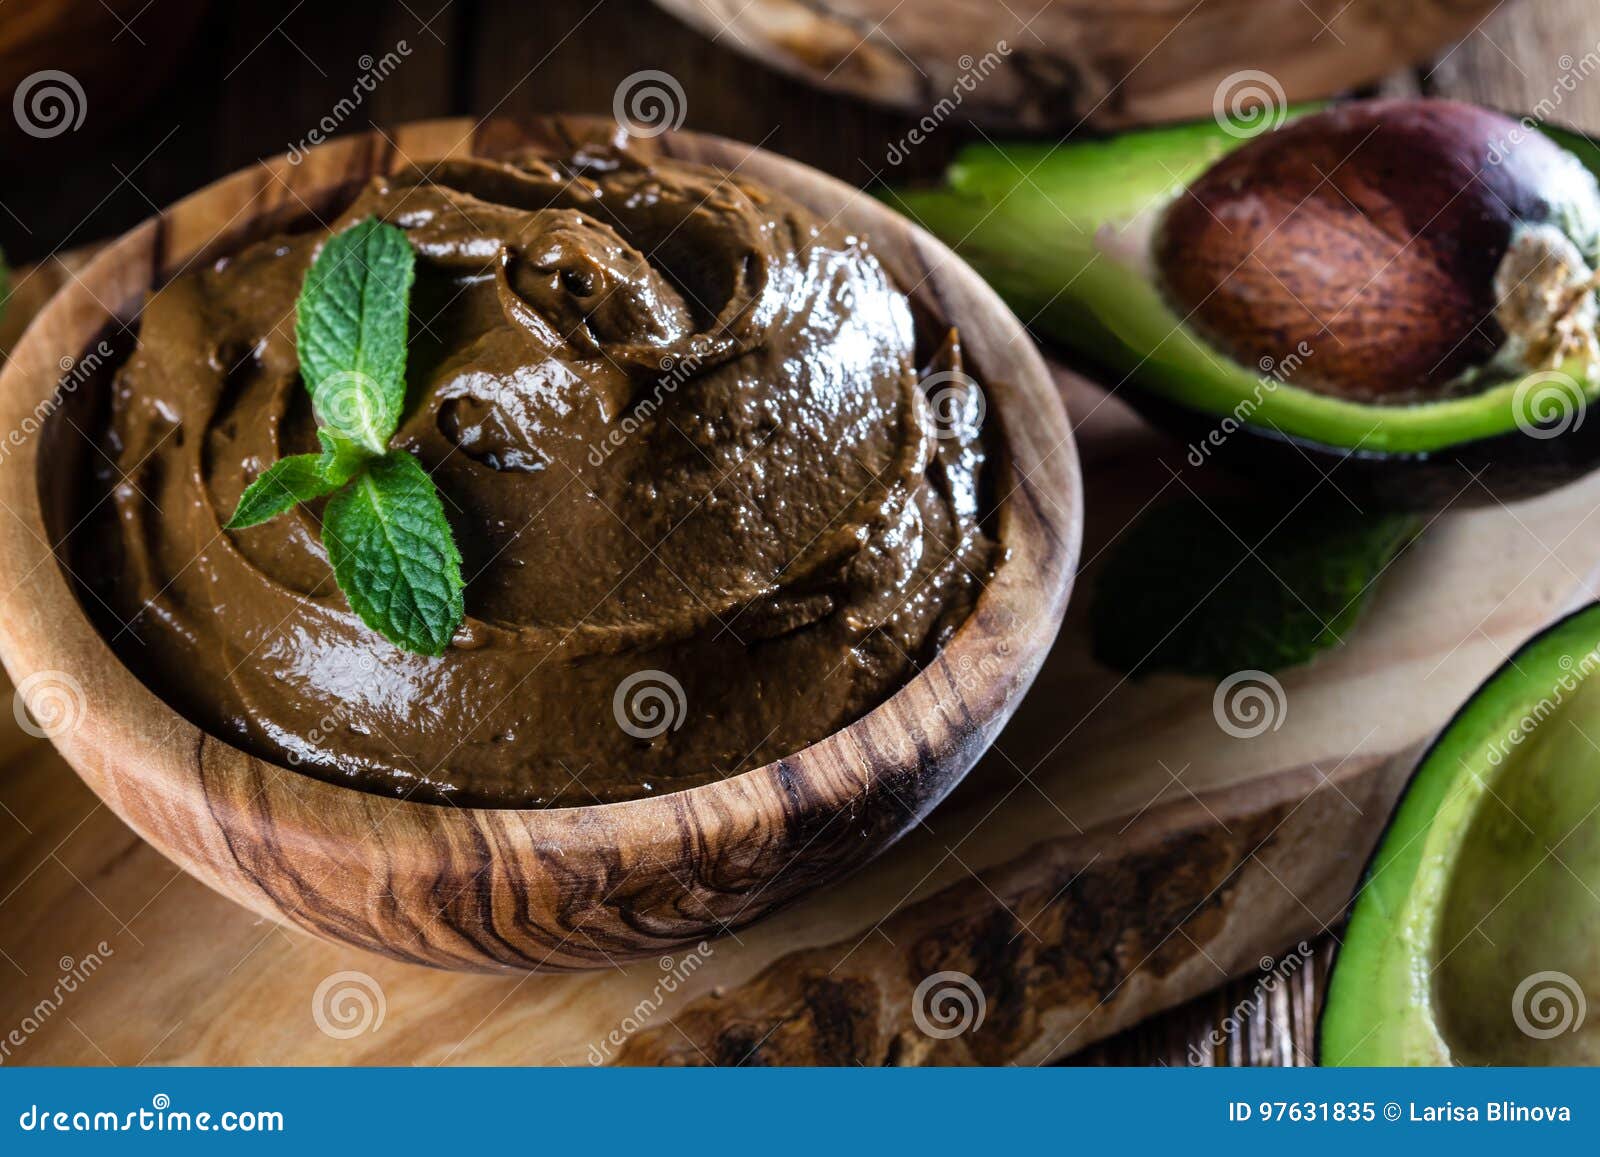 avocado chocolate mousse in olive wooden bowl